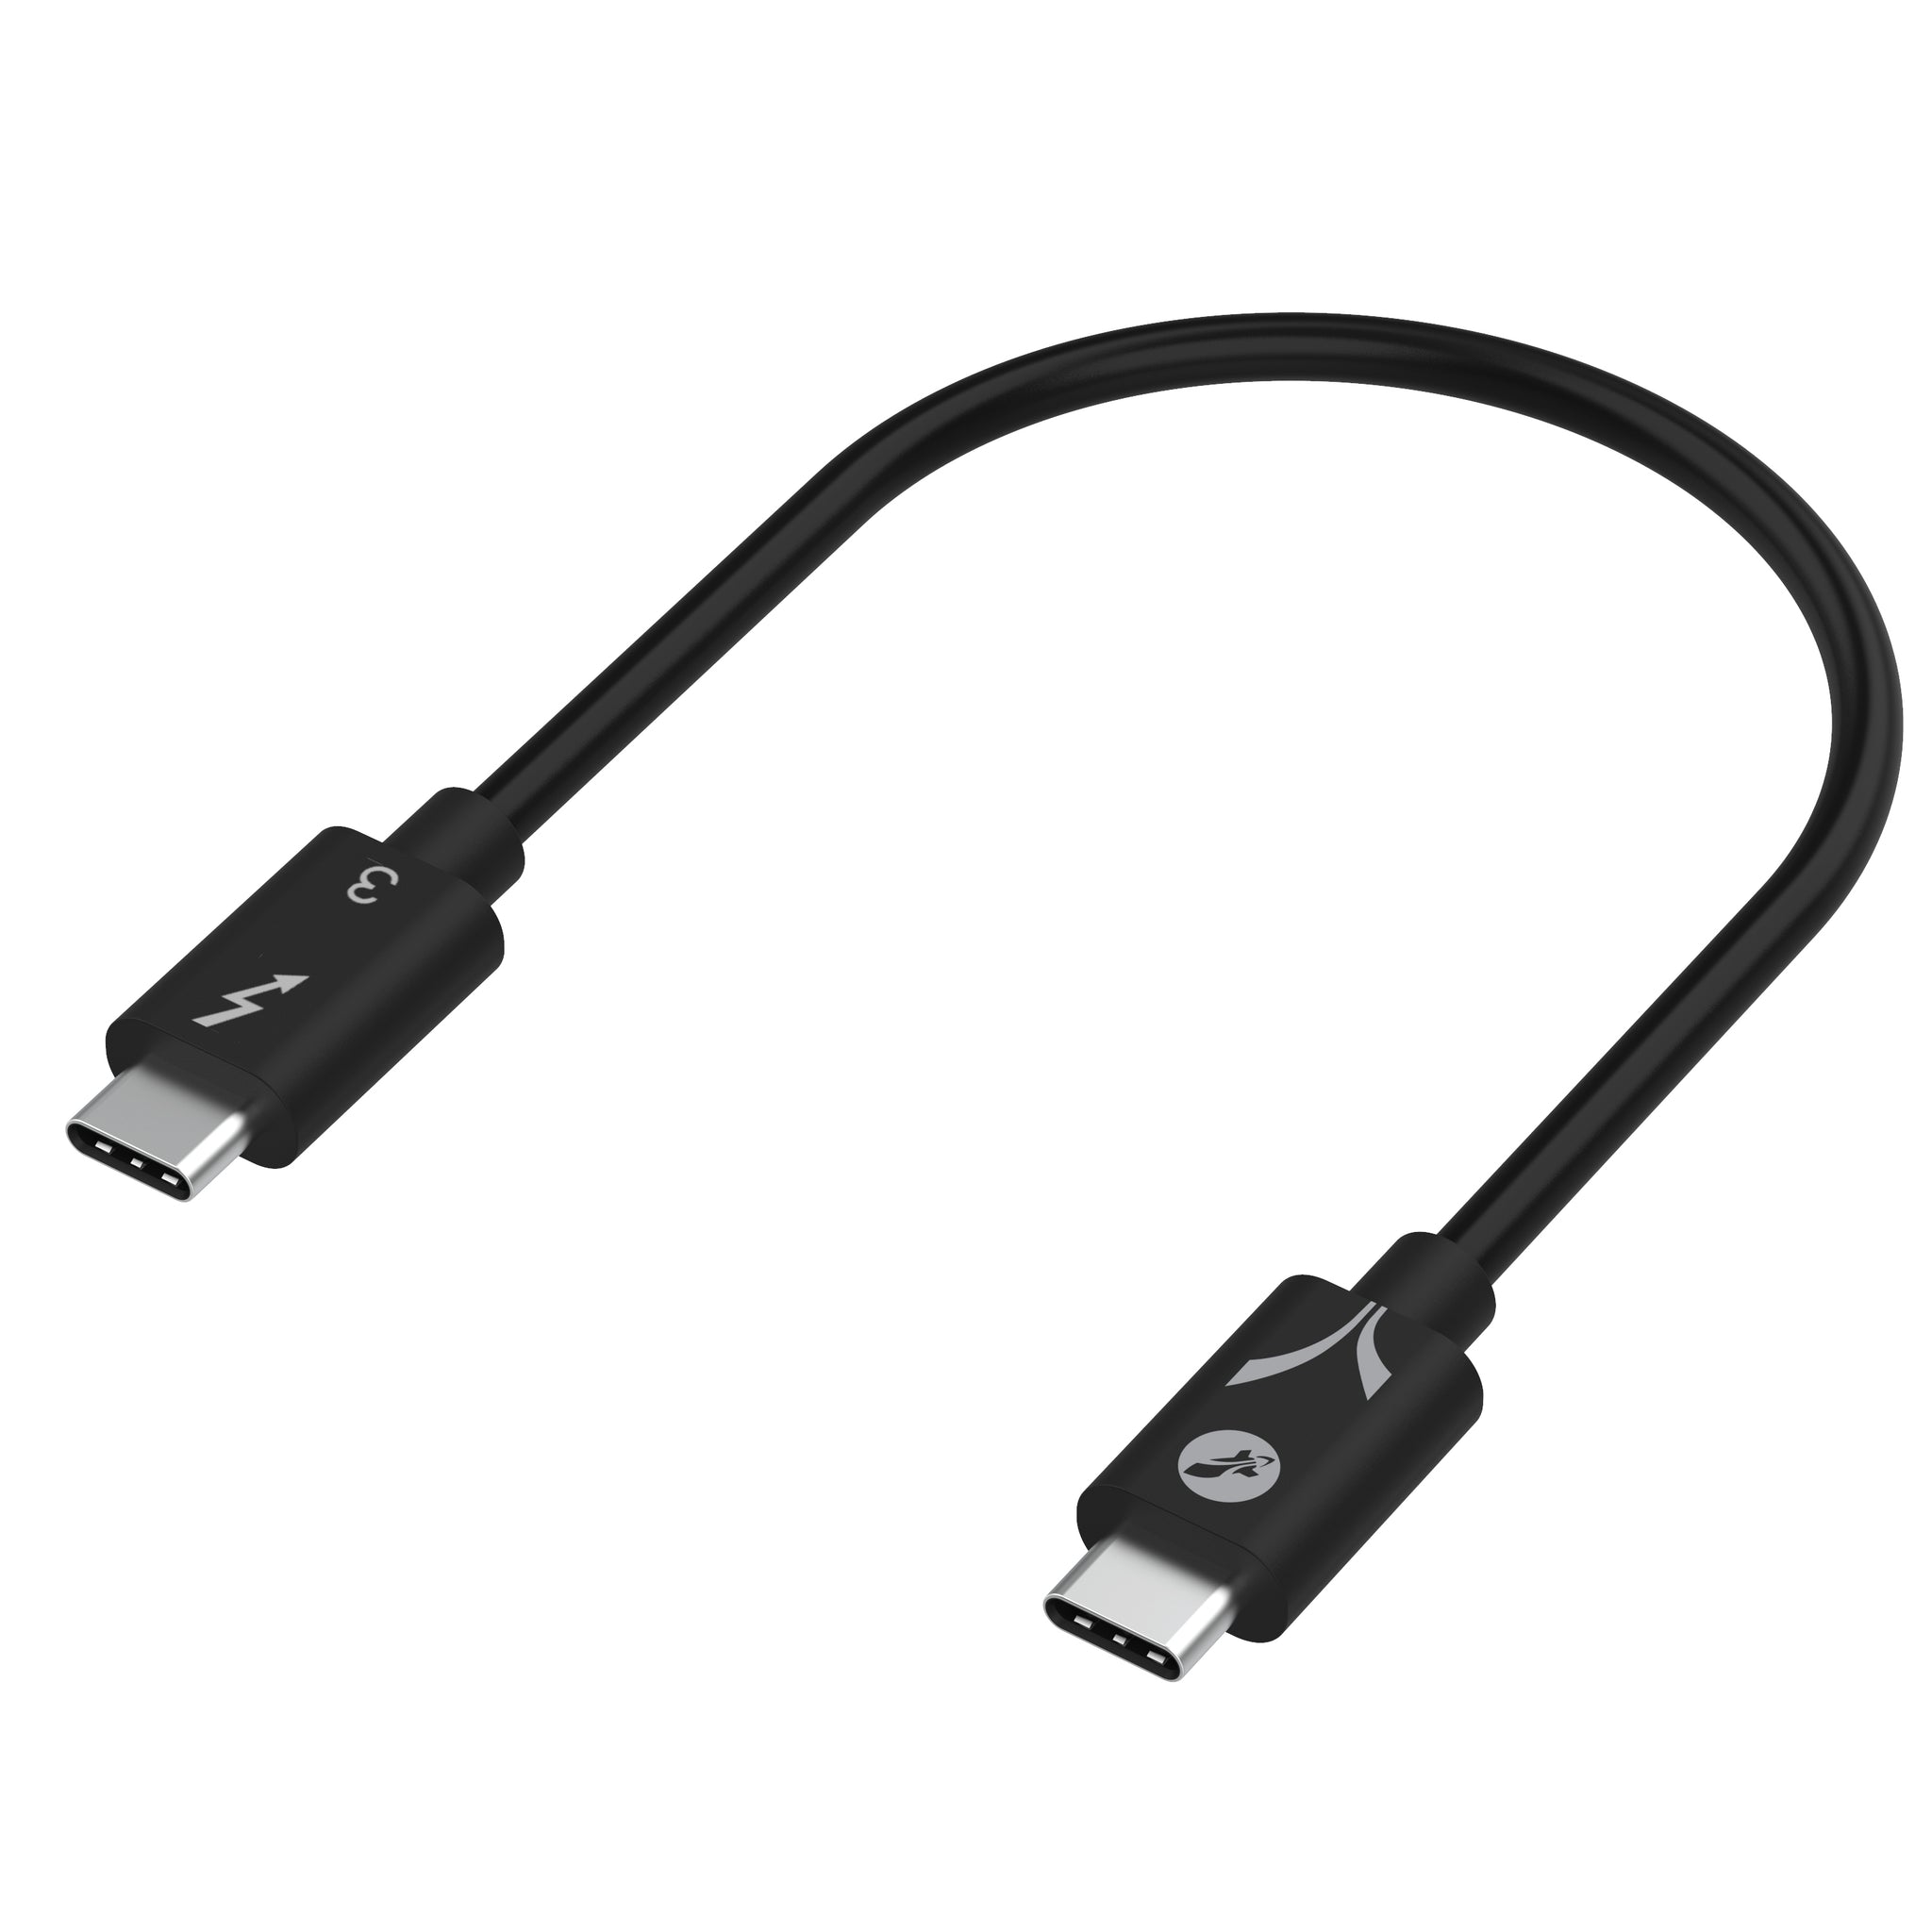 Intel Certified Thunderbolt 3 USB C Cable - CABLETIME